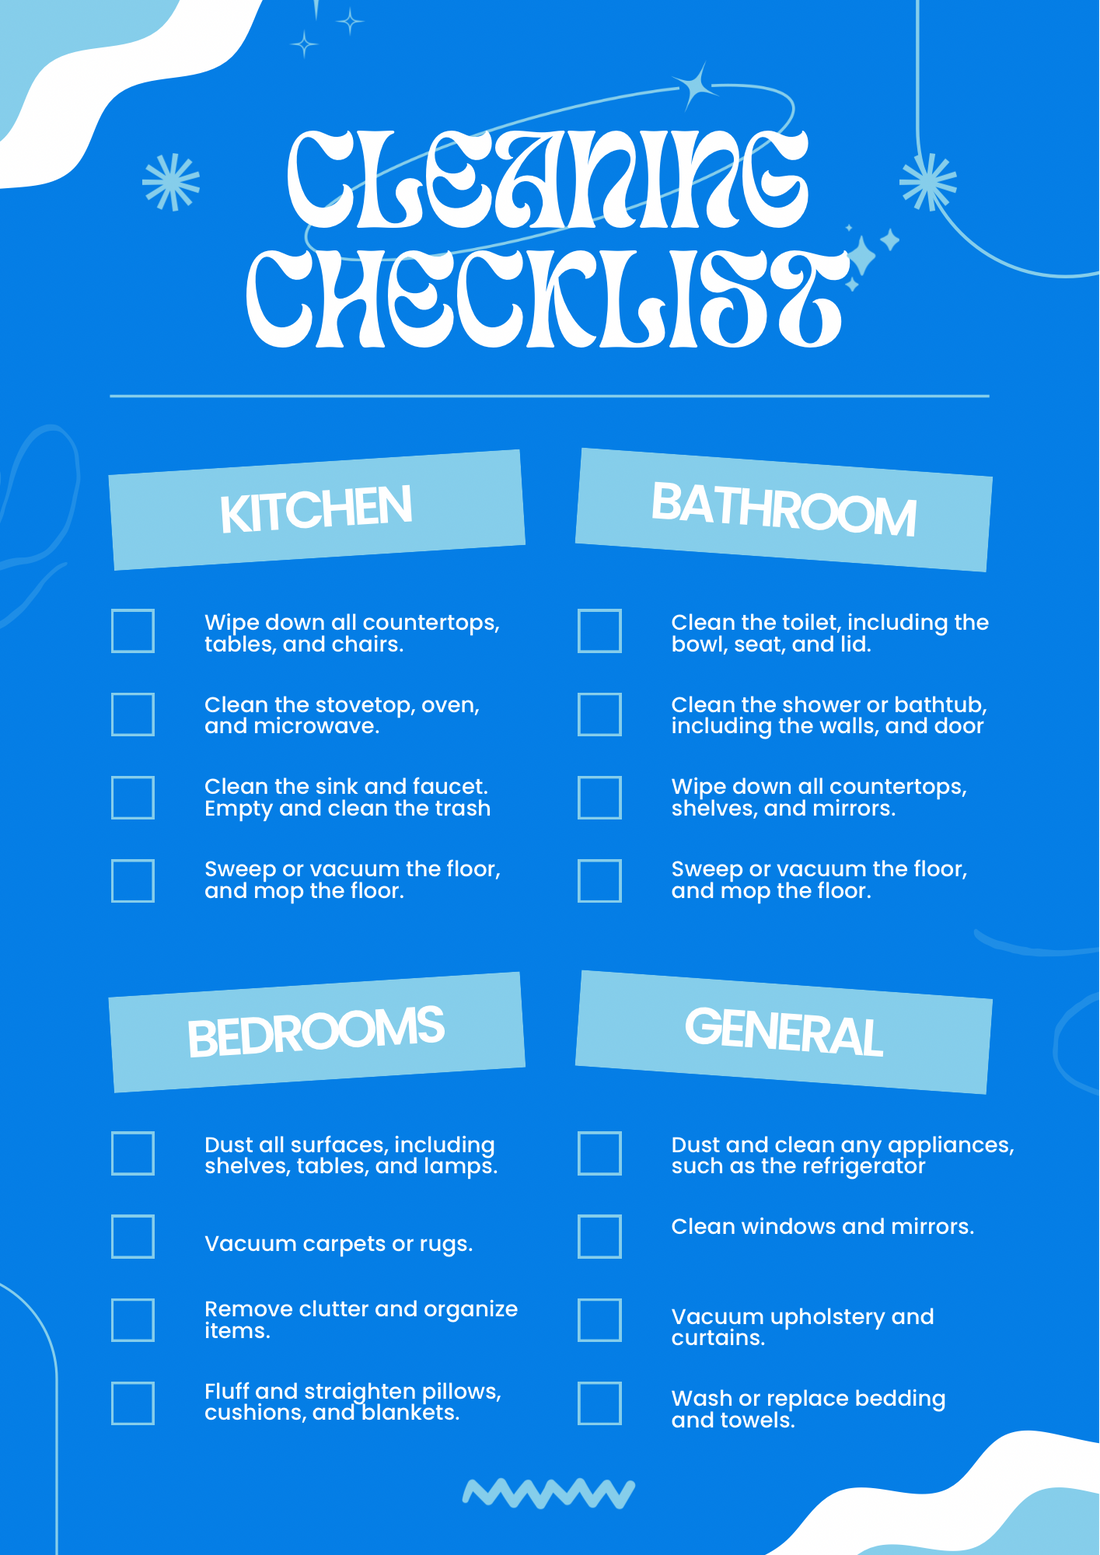 A checklist with cleaning tasks for different rooms of a house, next to a basket of cleaning supplies